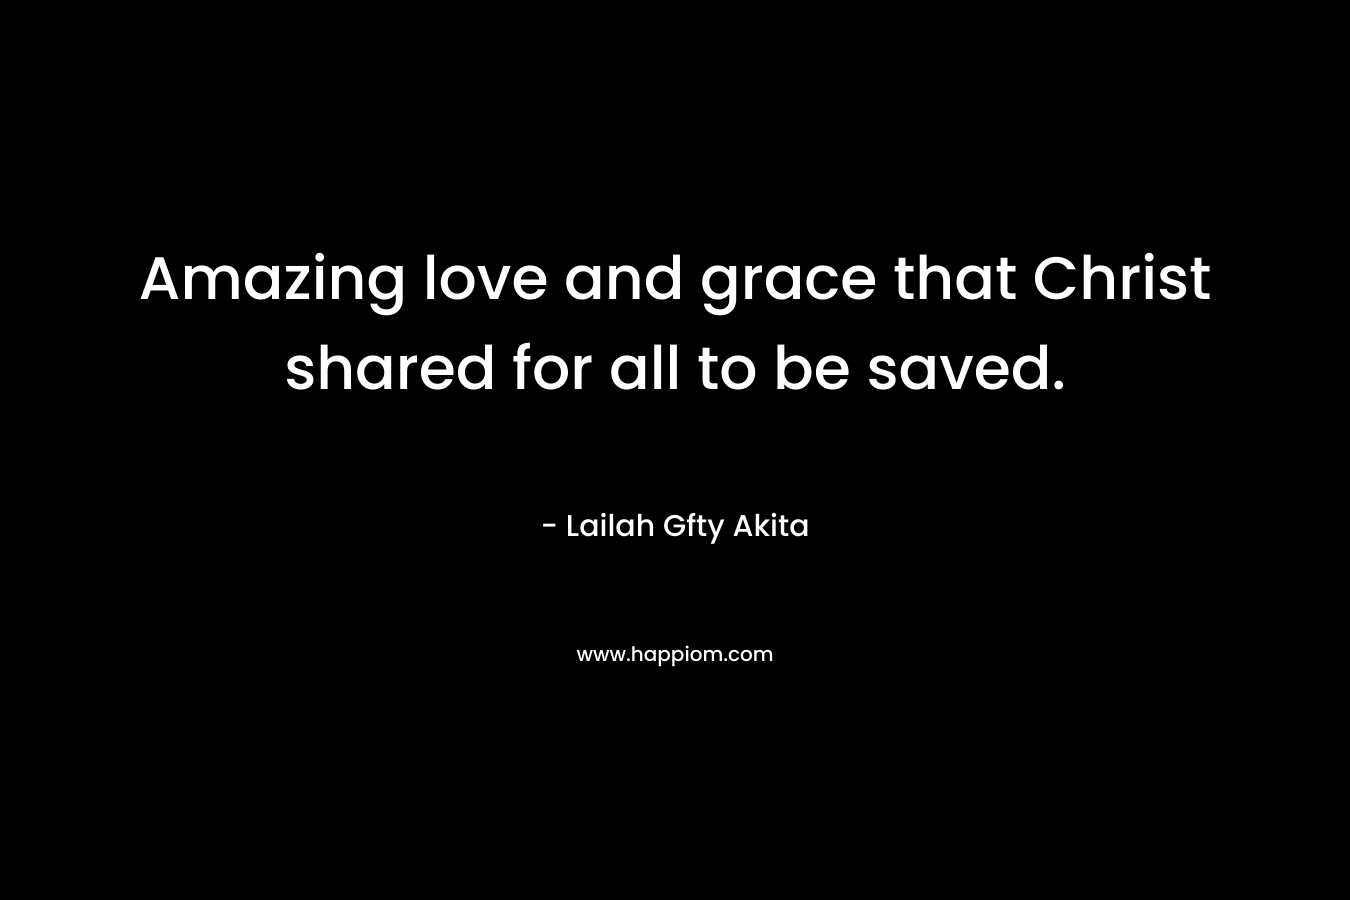 Amazing love and grace that Christ shared for all to be saved. – Lailah Gfty Akita